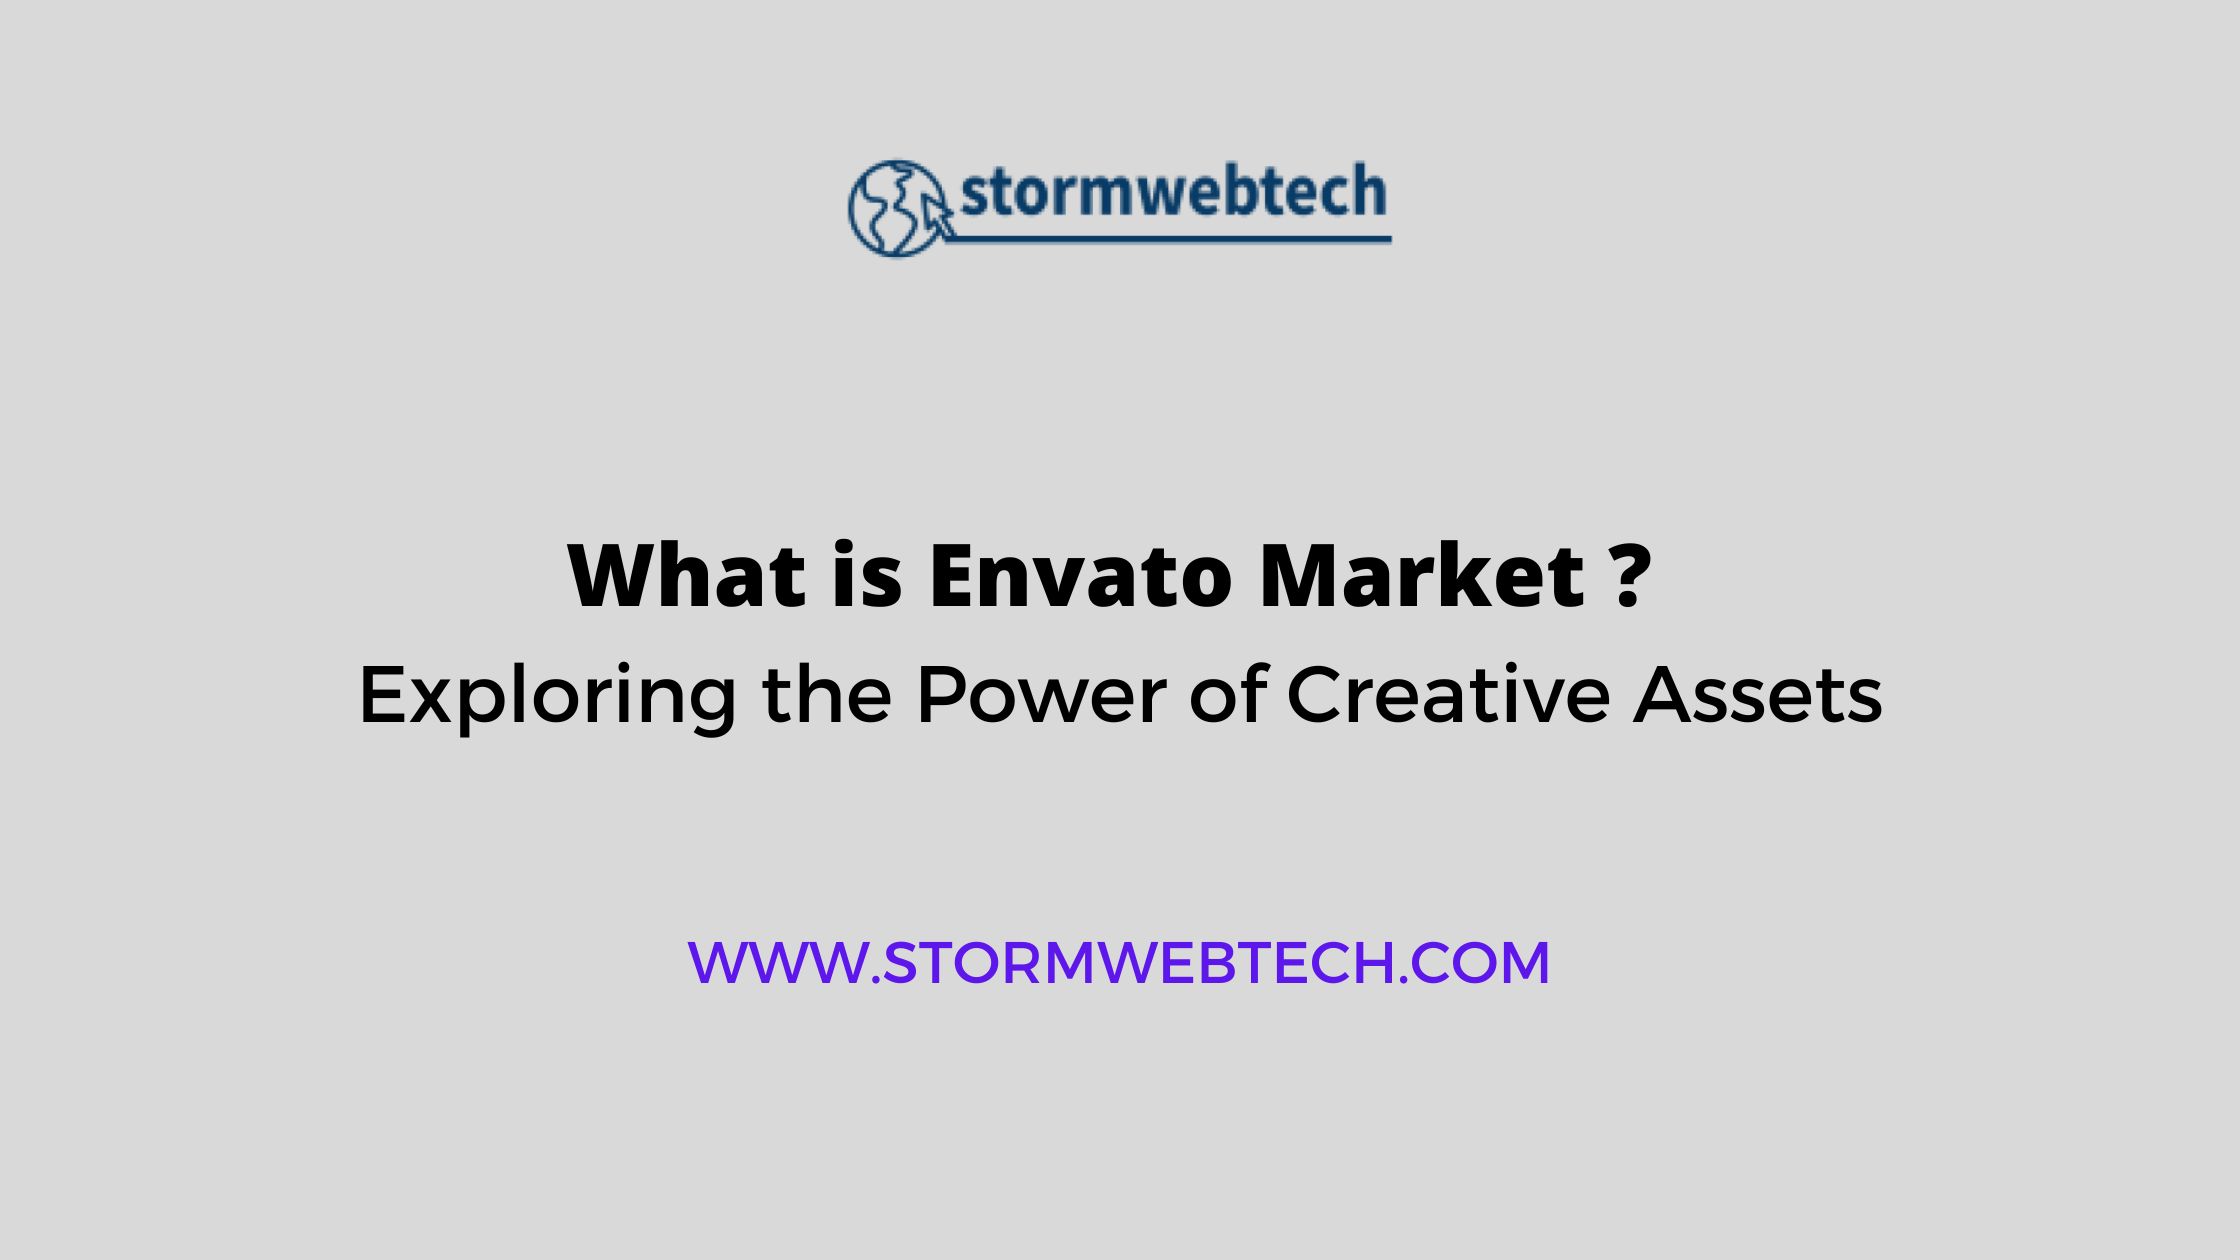 What is Envato Market ? how Envato Market has revolutionized the way creatives access and utilize digital resources ?